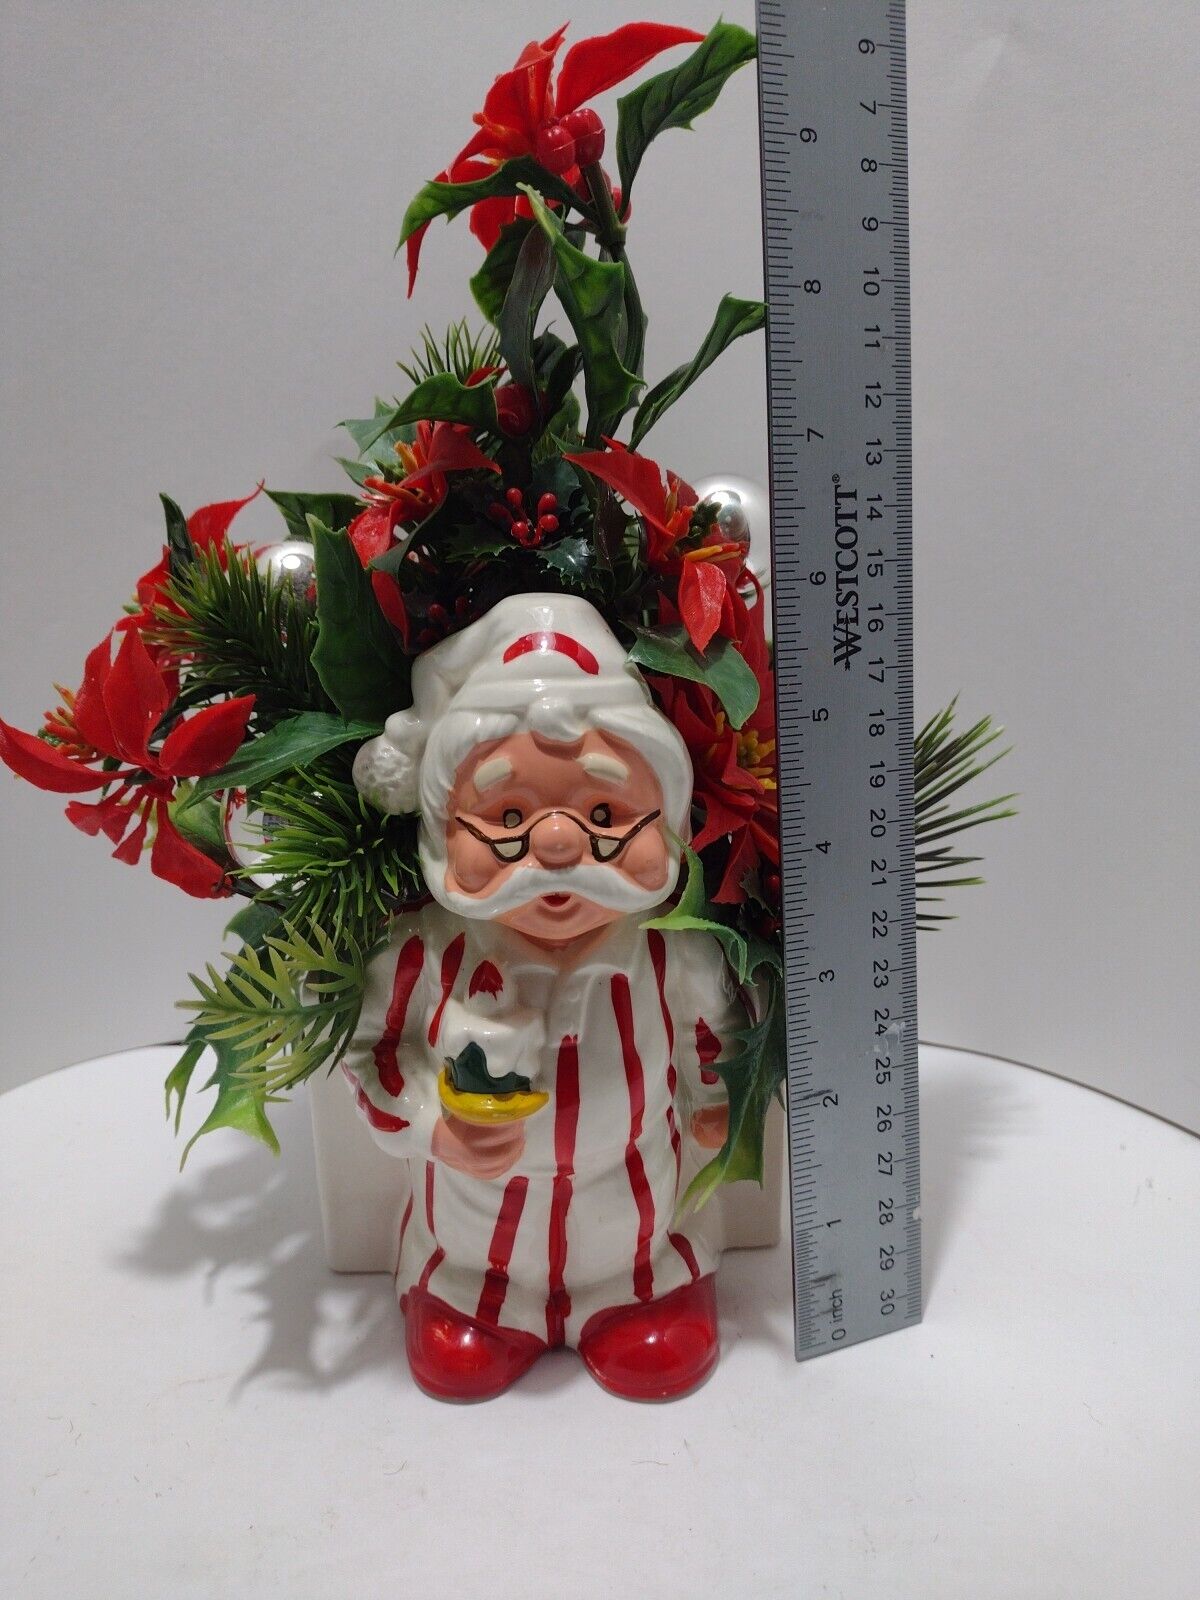 Vintage Inarco Santa Planter In Red & White Striped Pajamas With Plastic...